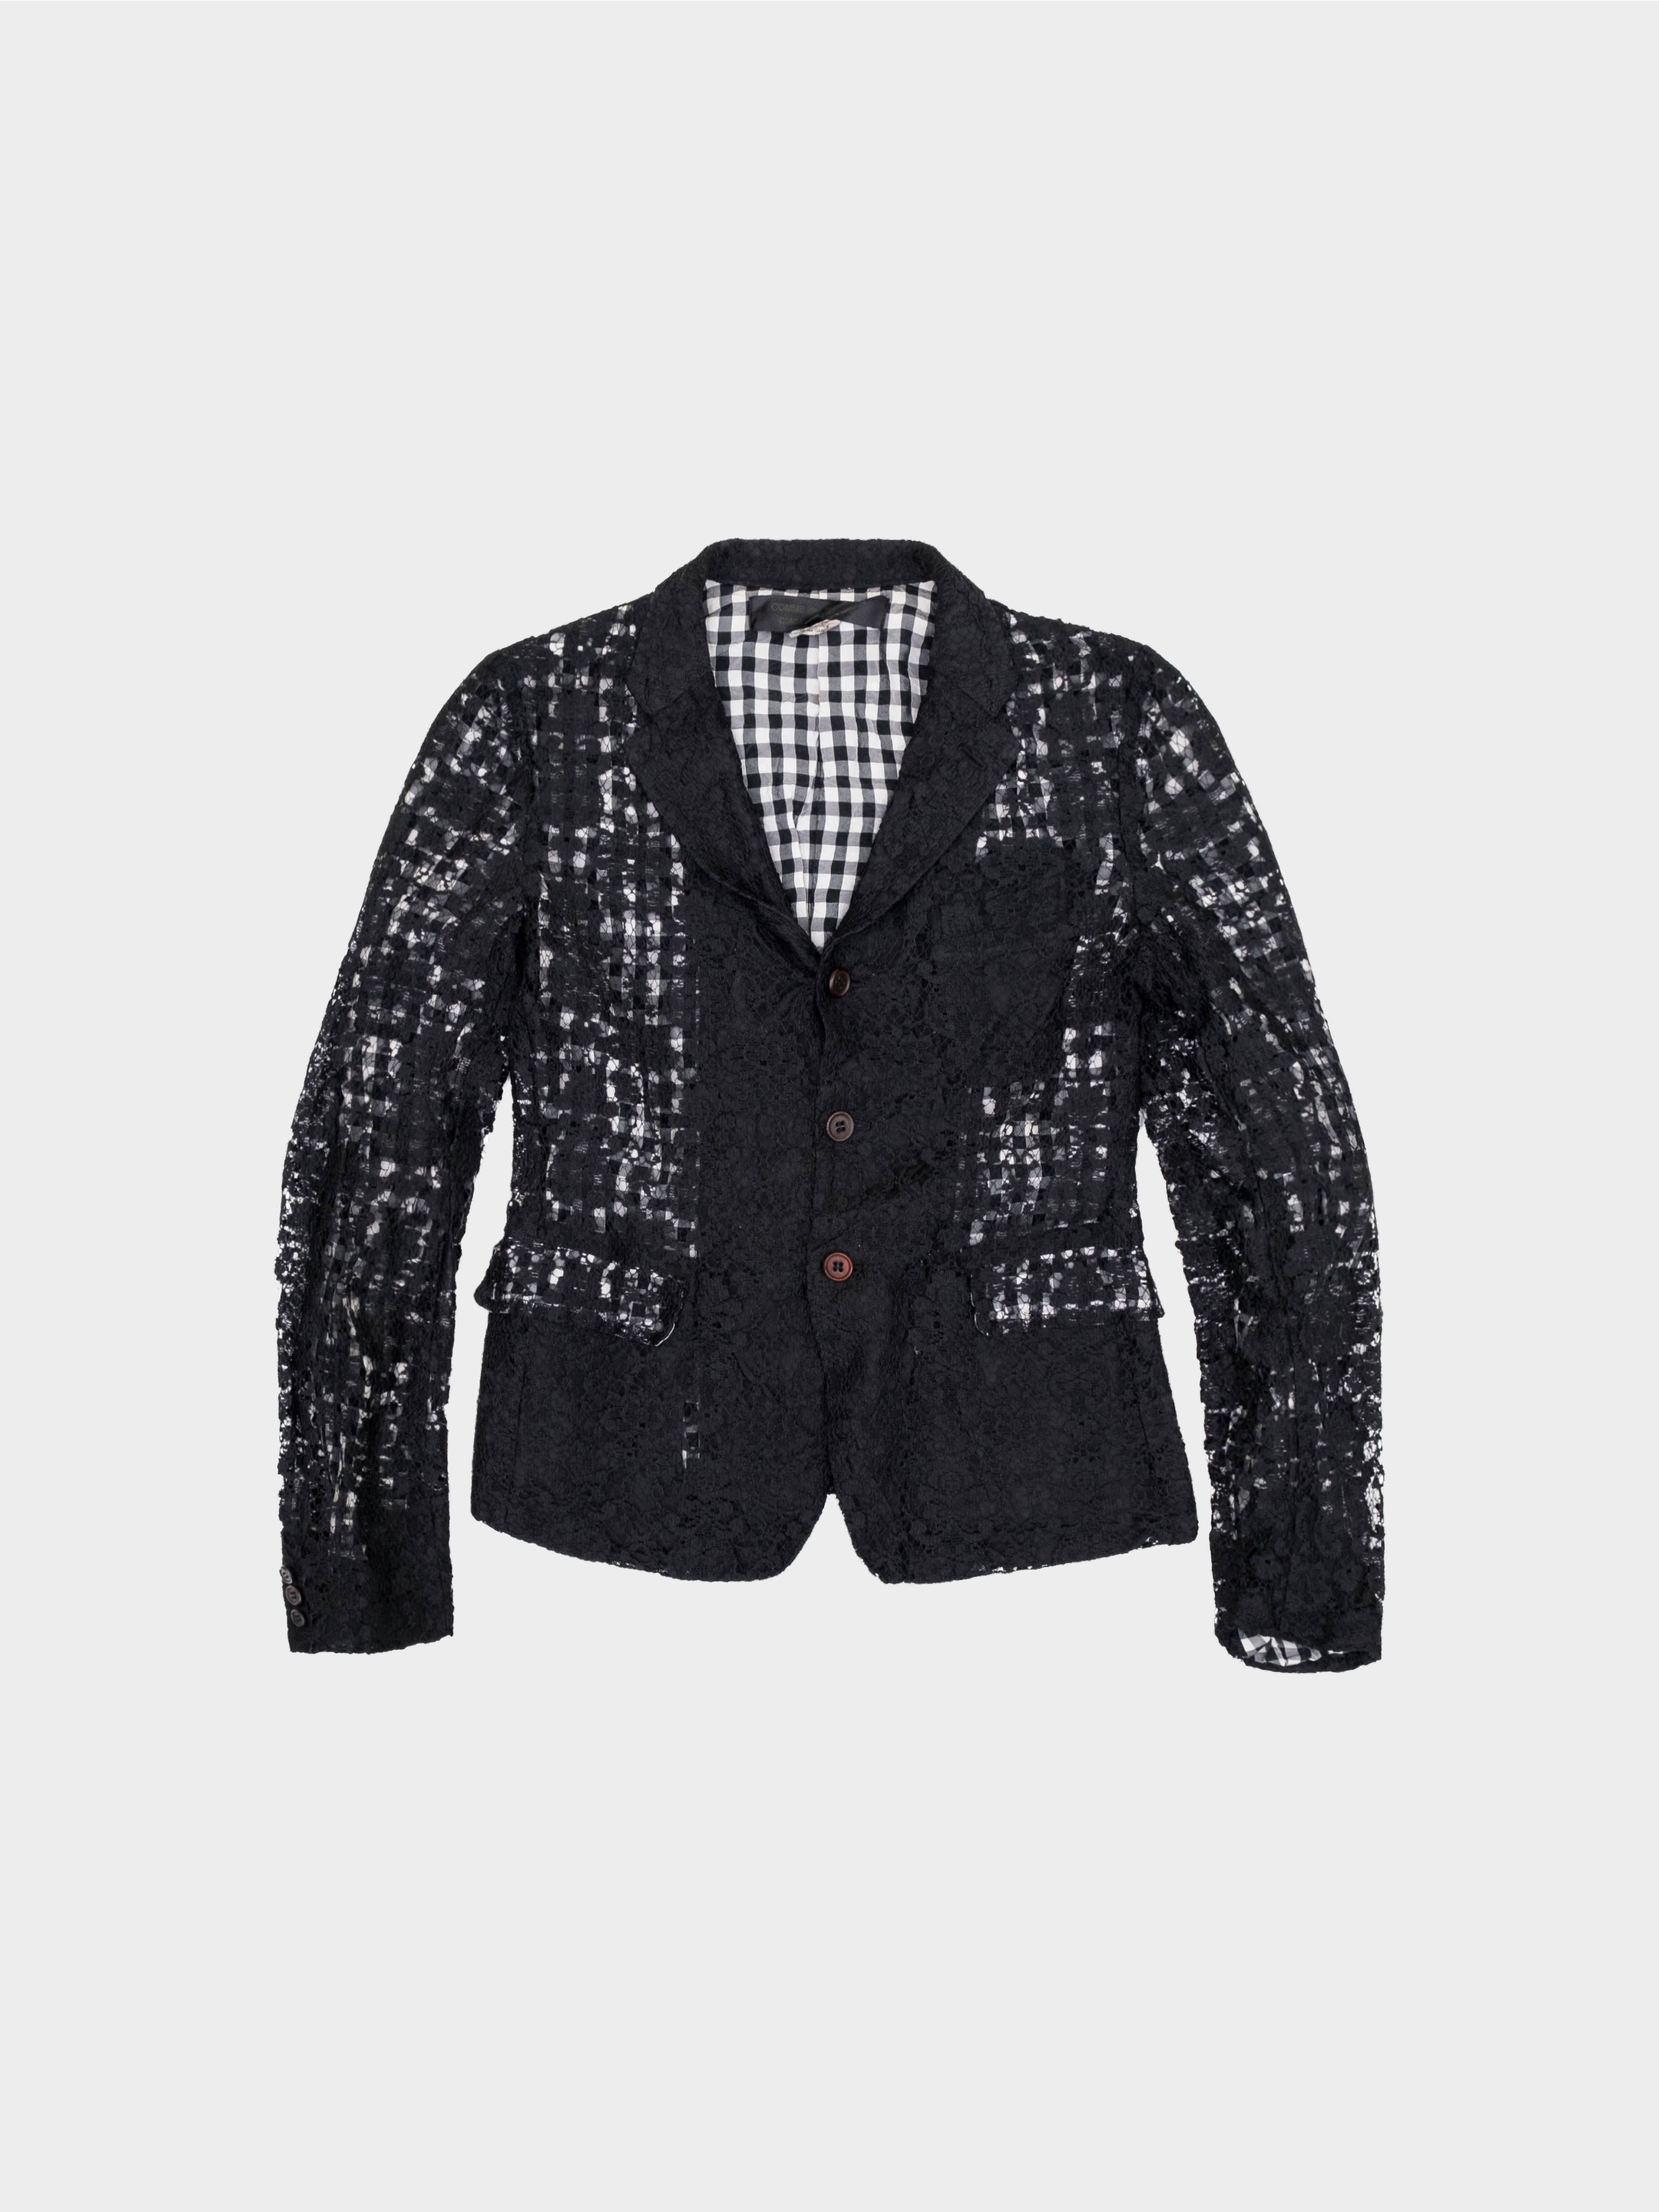 Comme des Garçons SS 2012 Lace Blazer with Checkered Lining